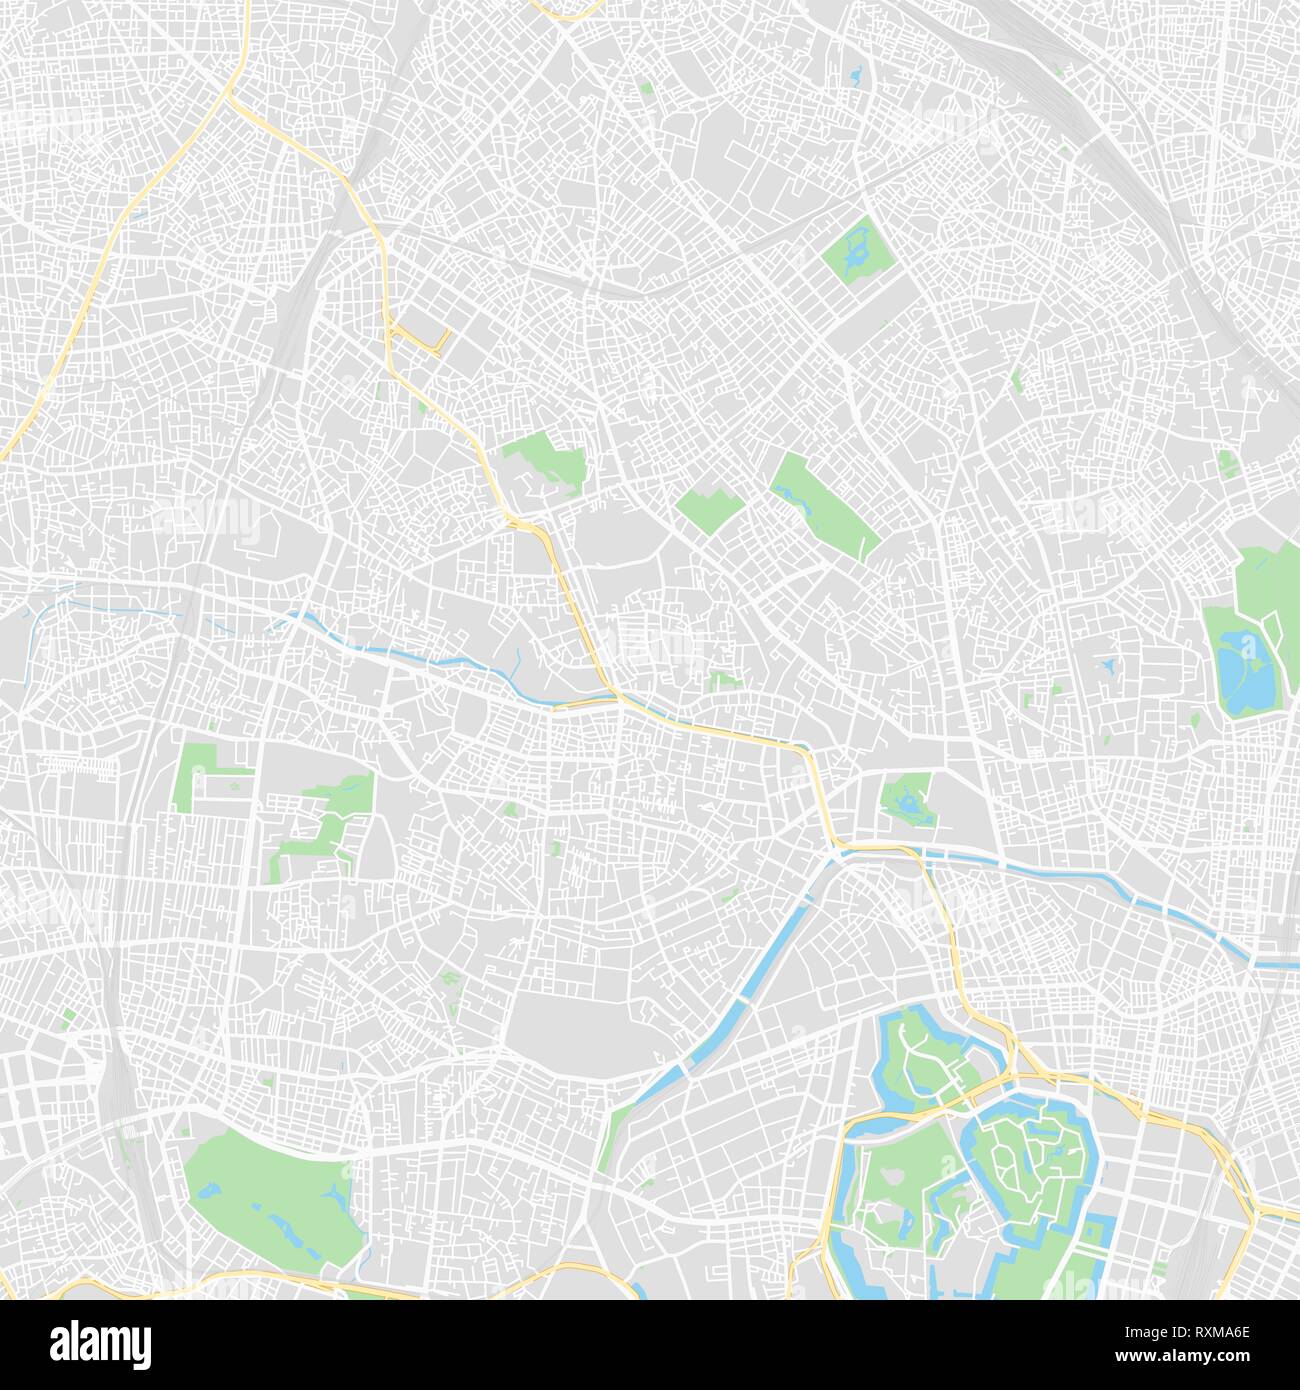 Downtown vector map of Tokyo, Japan. This printable map of Tokyo contains lines and classic colored shapes for land mass, parks, water, major and mino Stock Vector